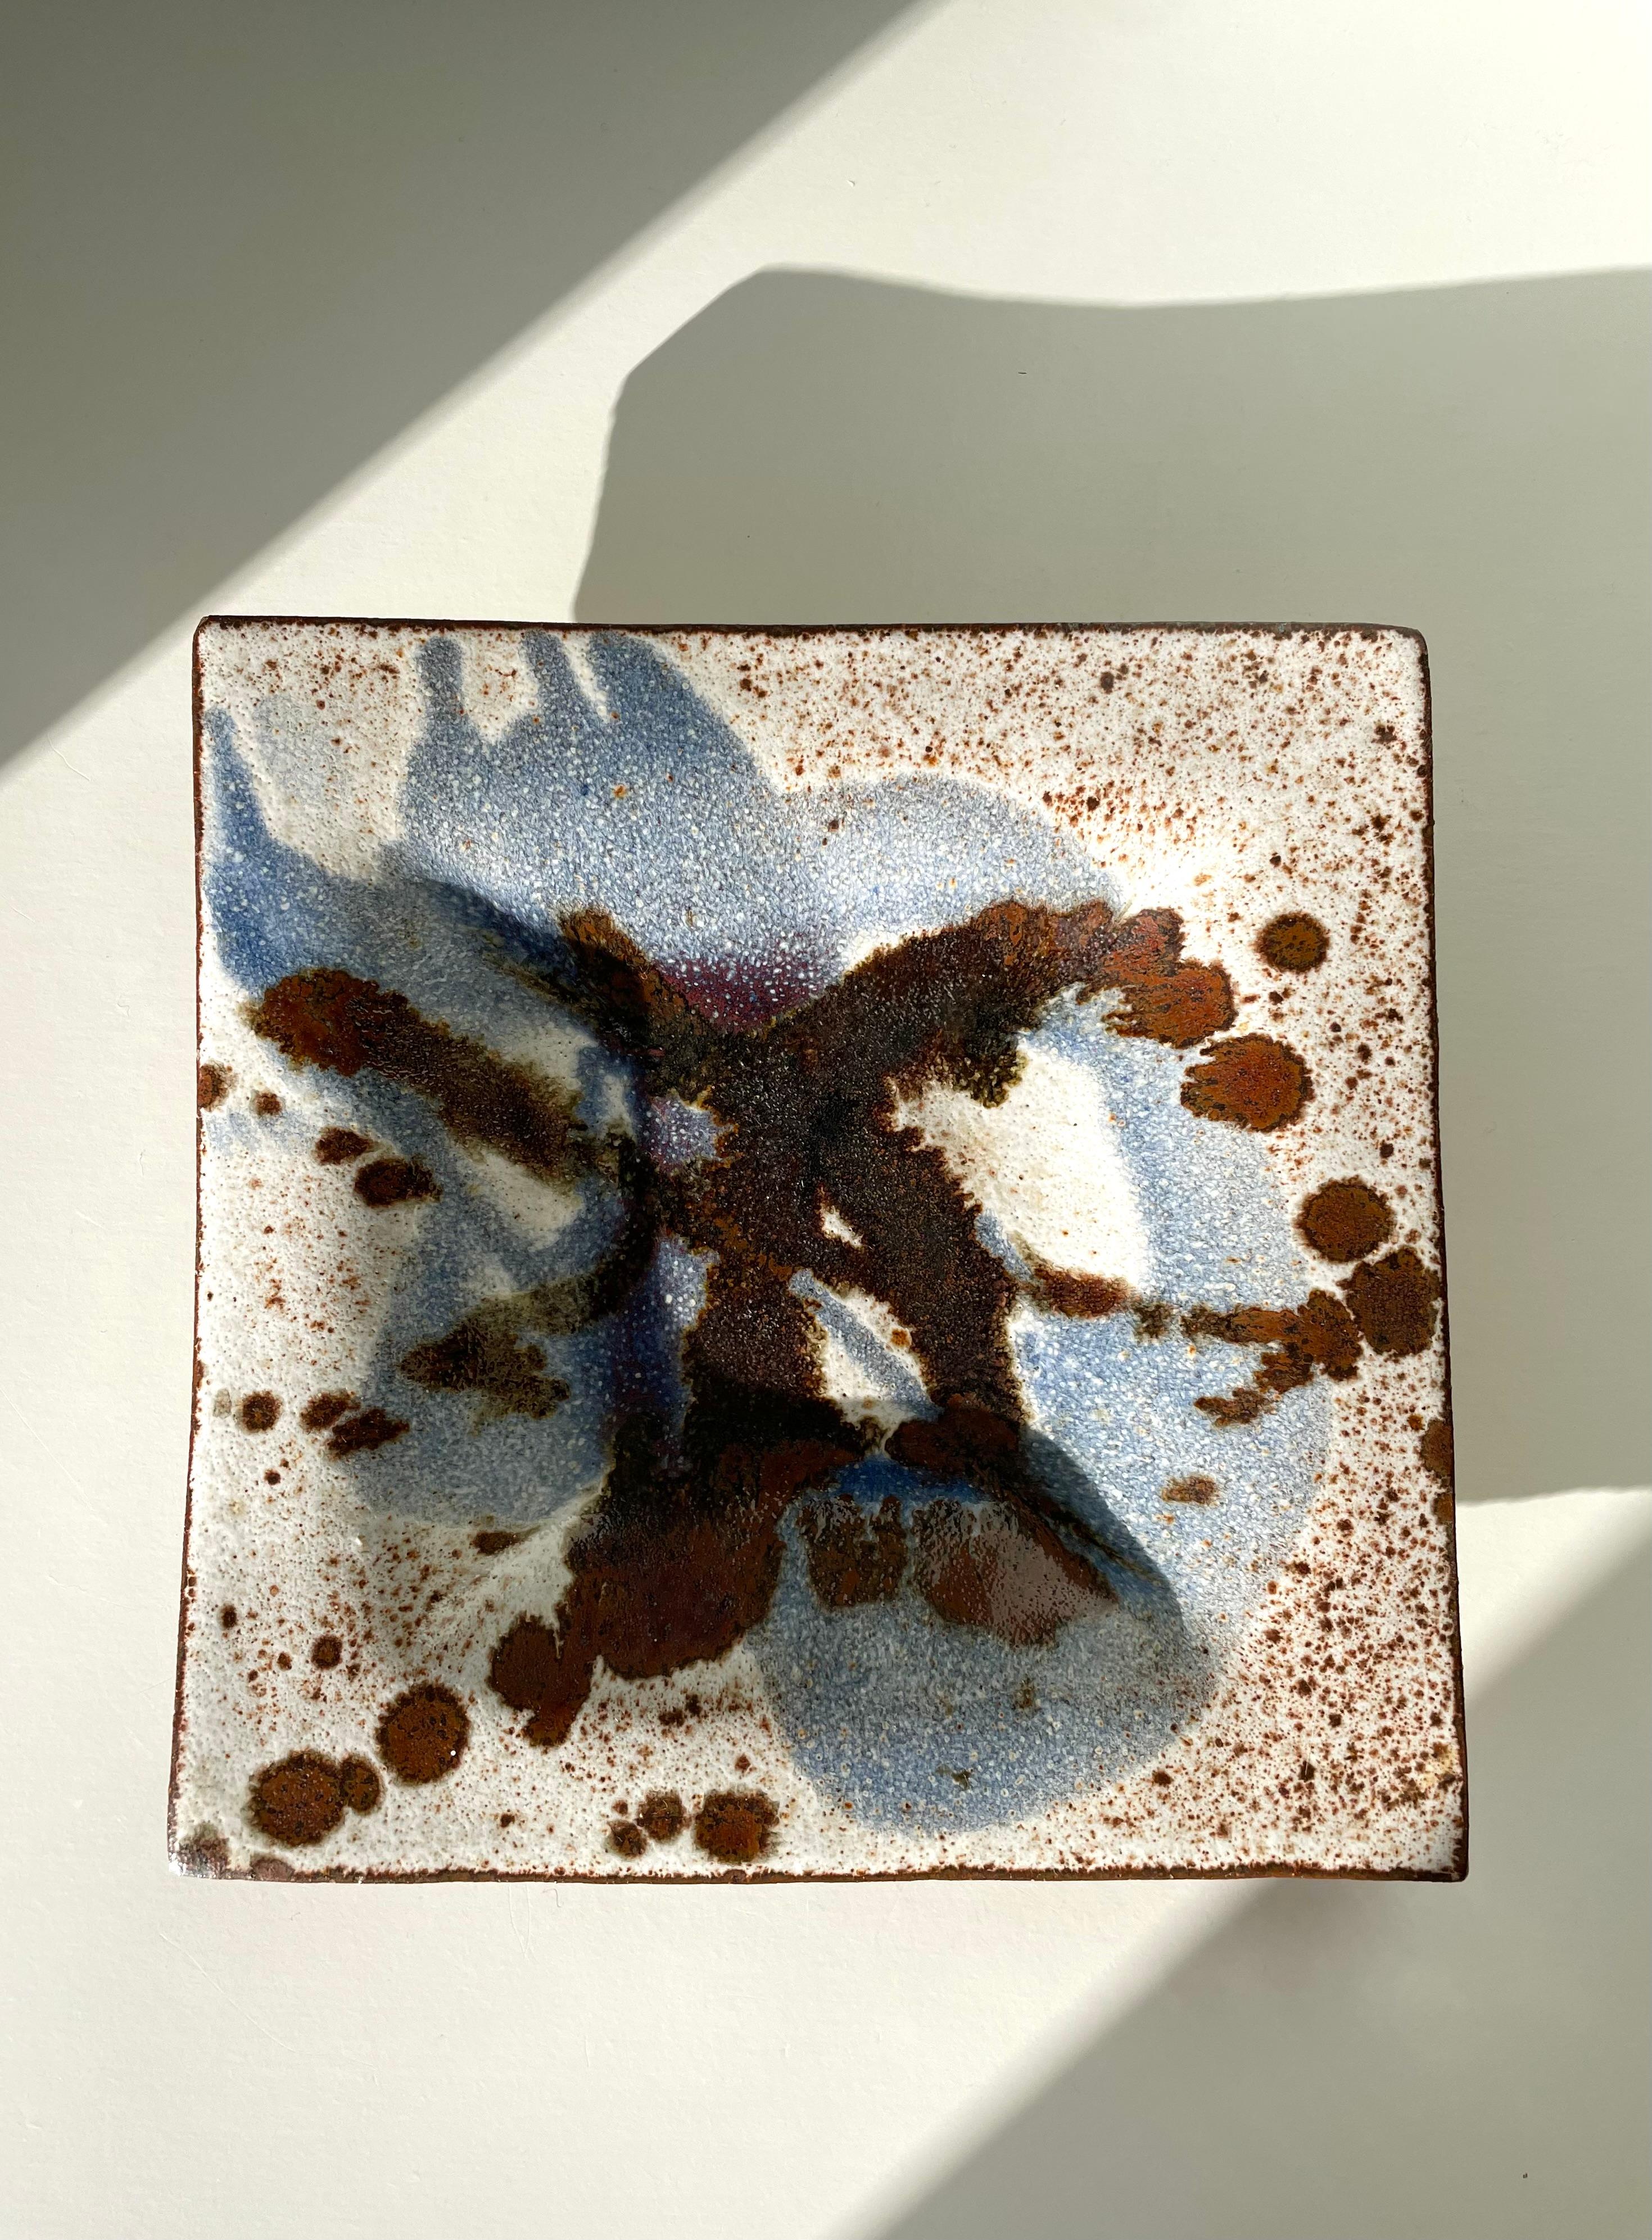 Ceramic wall plaque handmade by Danish artist Jørgen Finn Petersen in the 1960s. Square bowl shape making the item usable as a decorative dish or centerpiece as well as an art piece hung on the wall. Hand-painted spotted glaze in warm browns, light